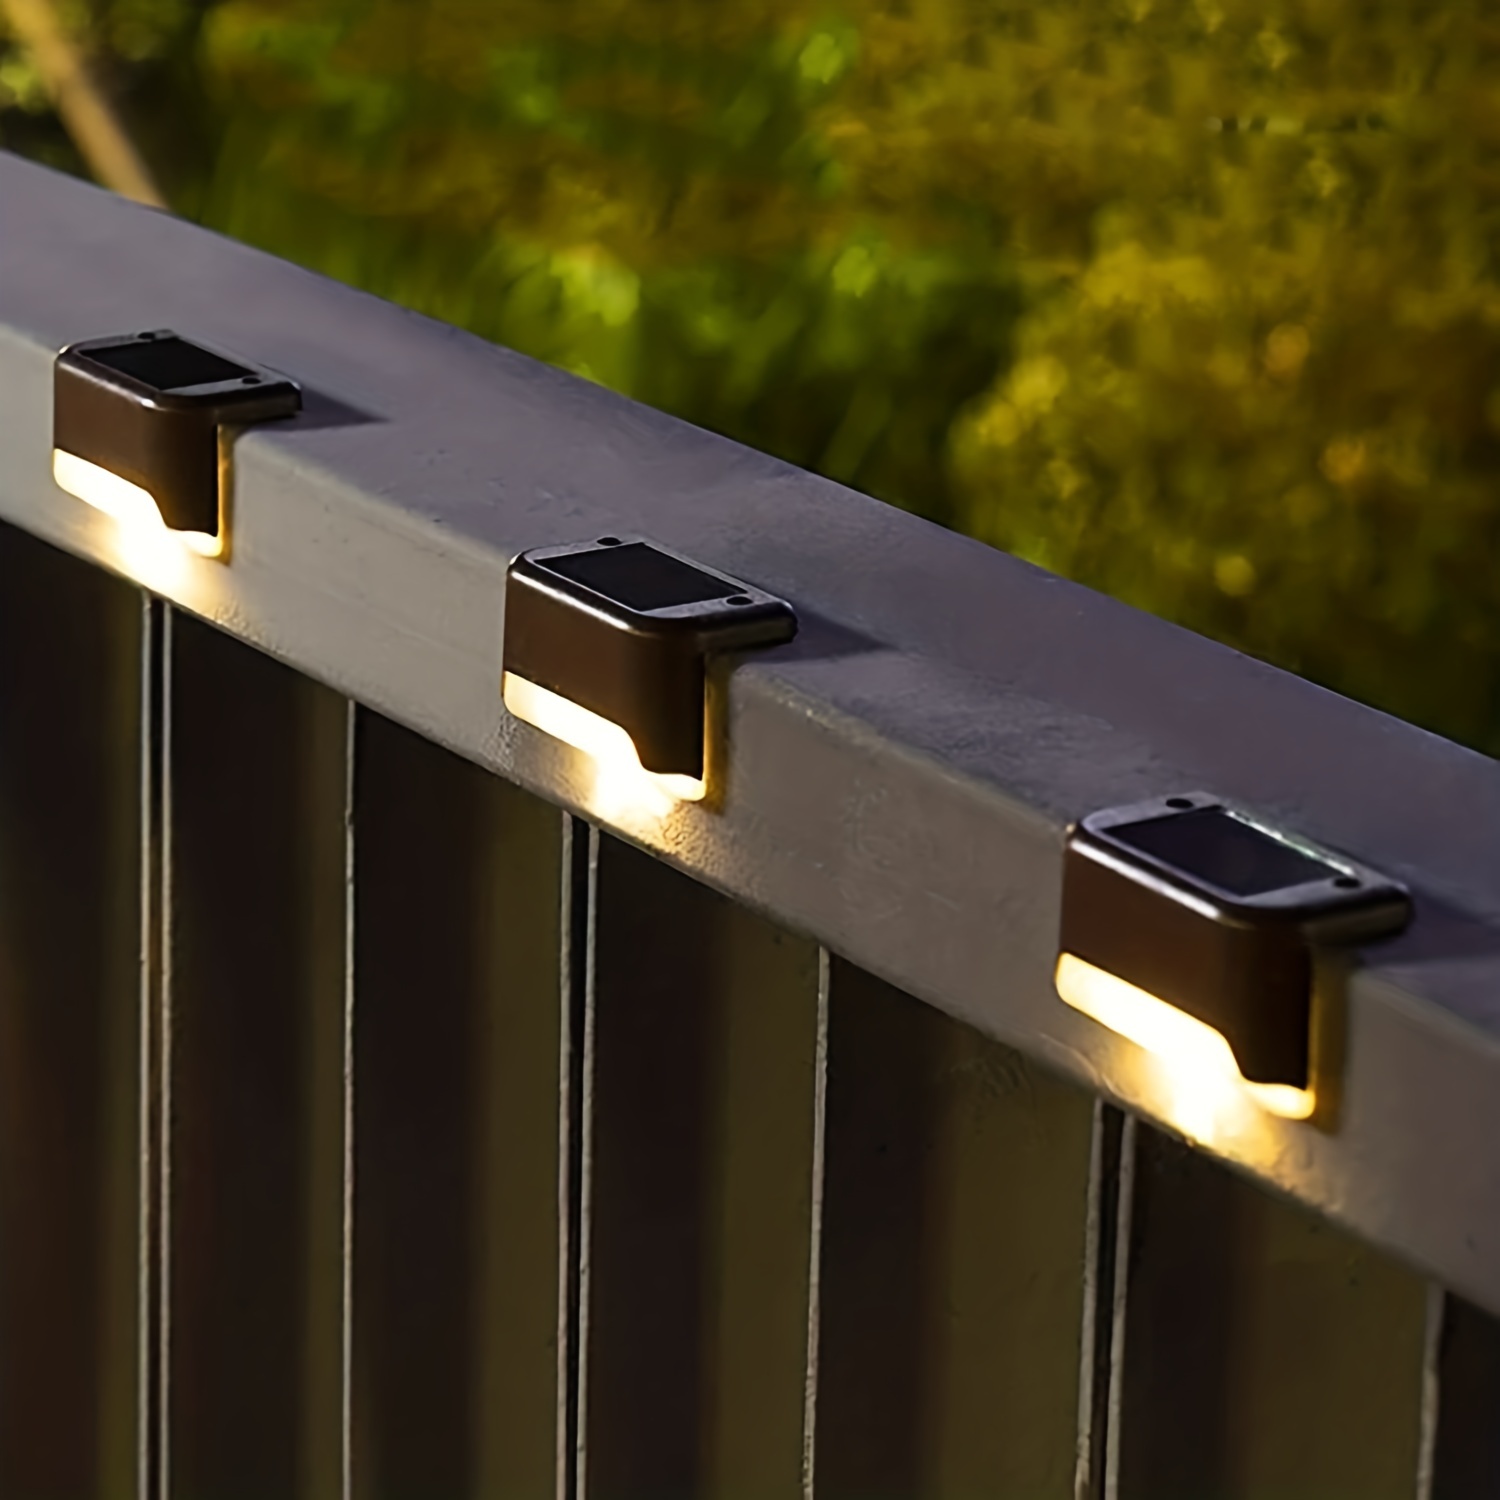 Brighten Up Your Outdoor Space With 4pcs Solar Stair Light Wall Deck Lights!